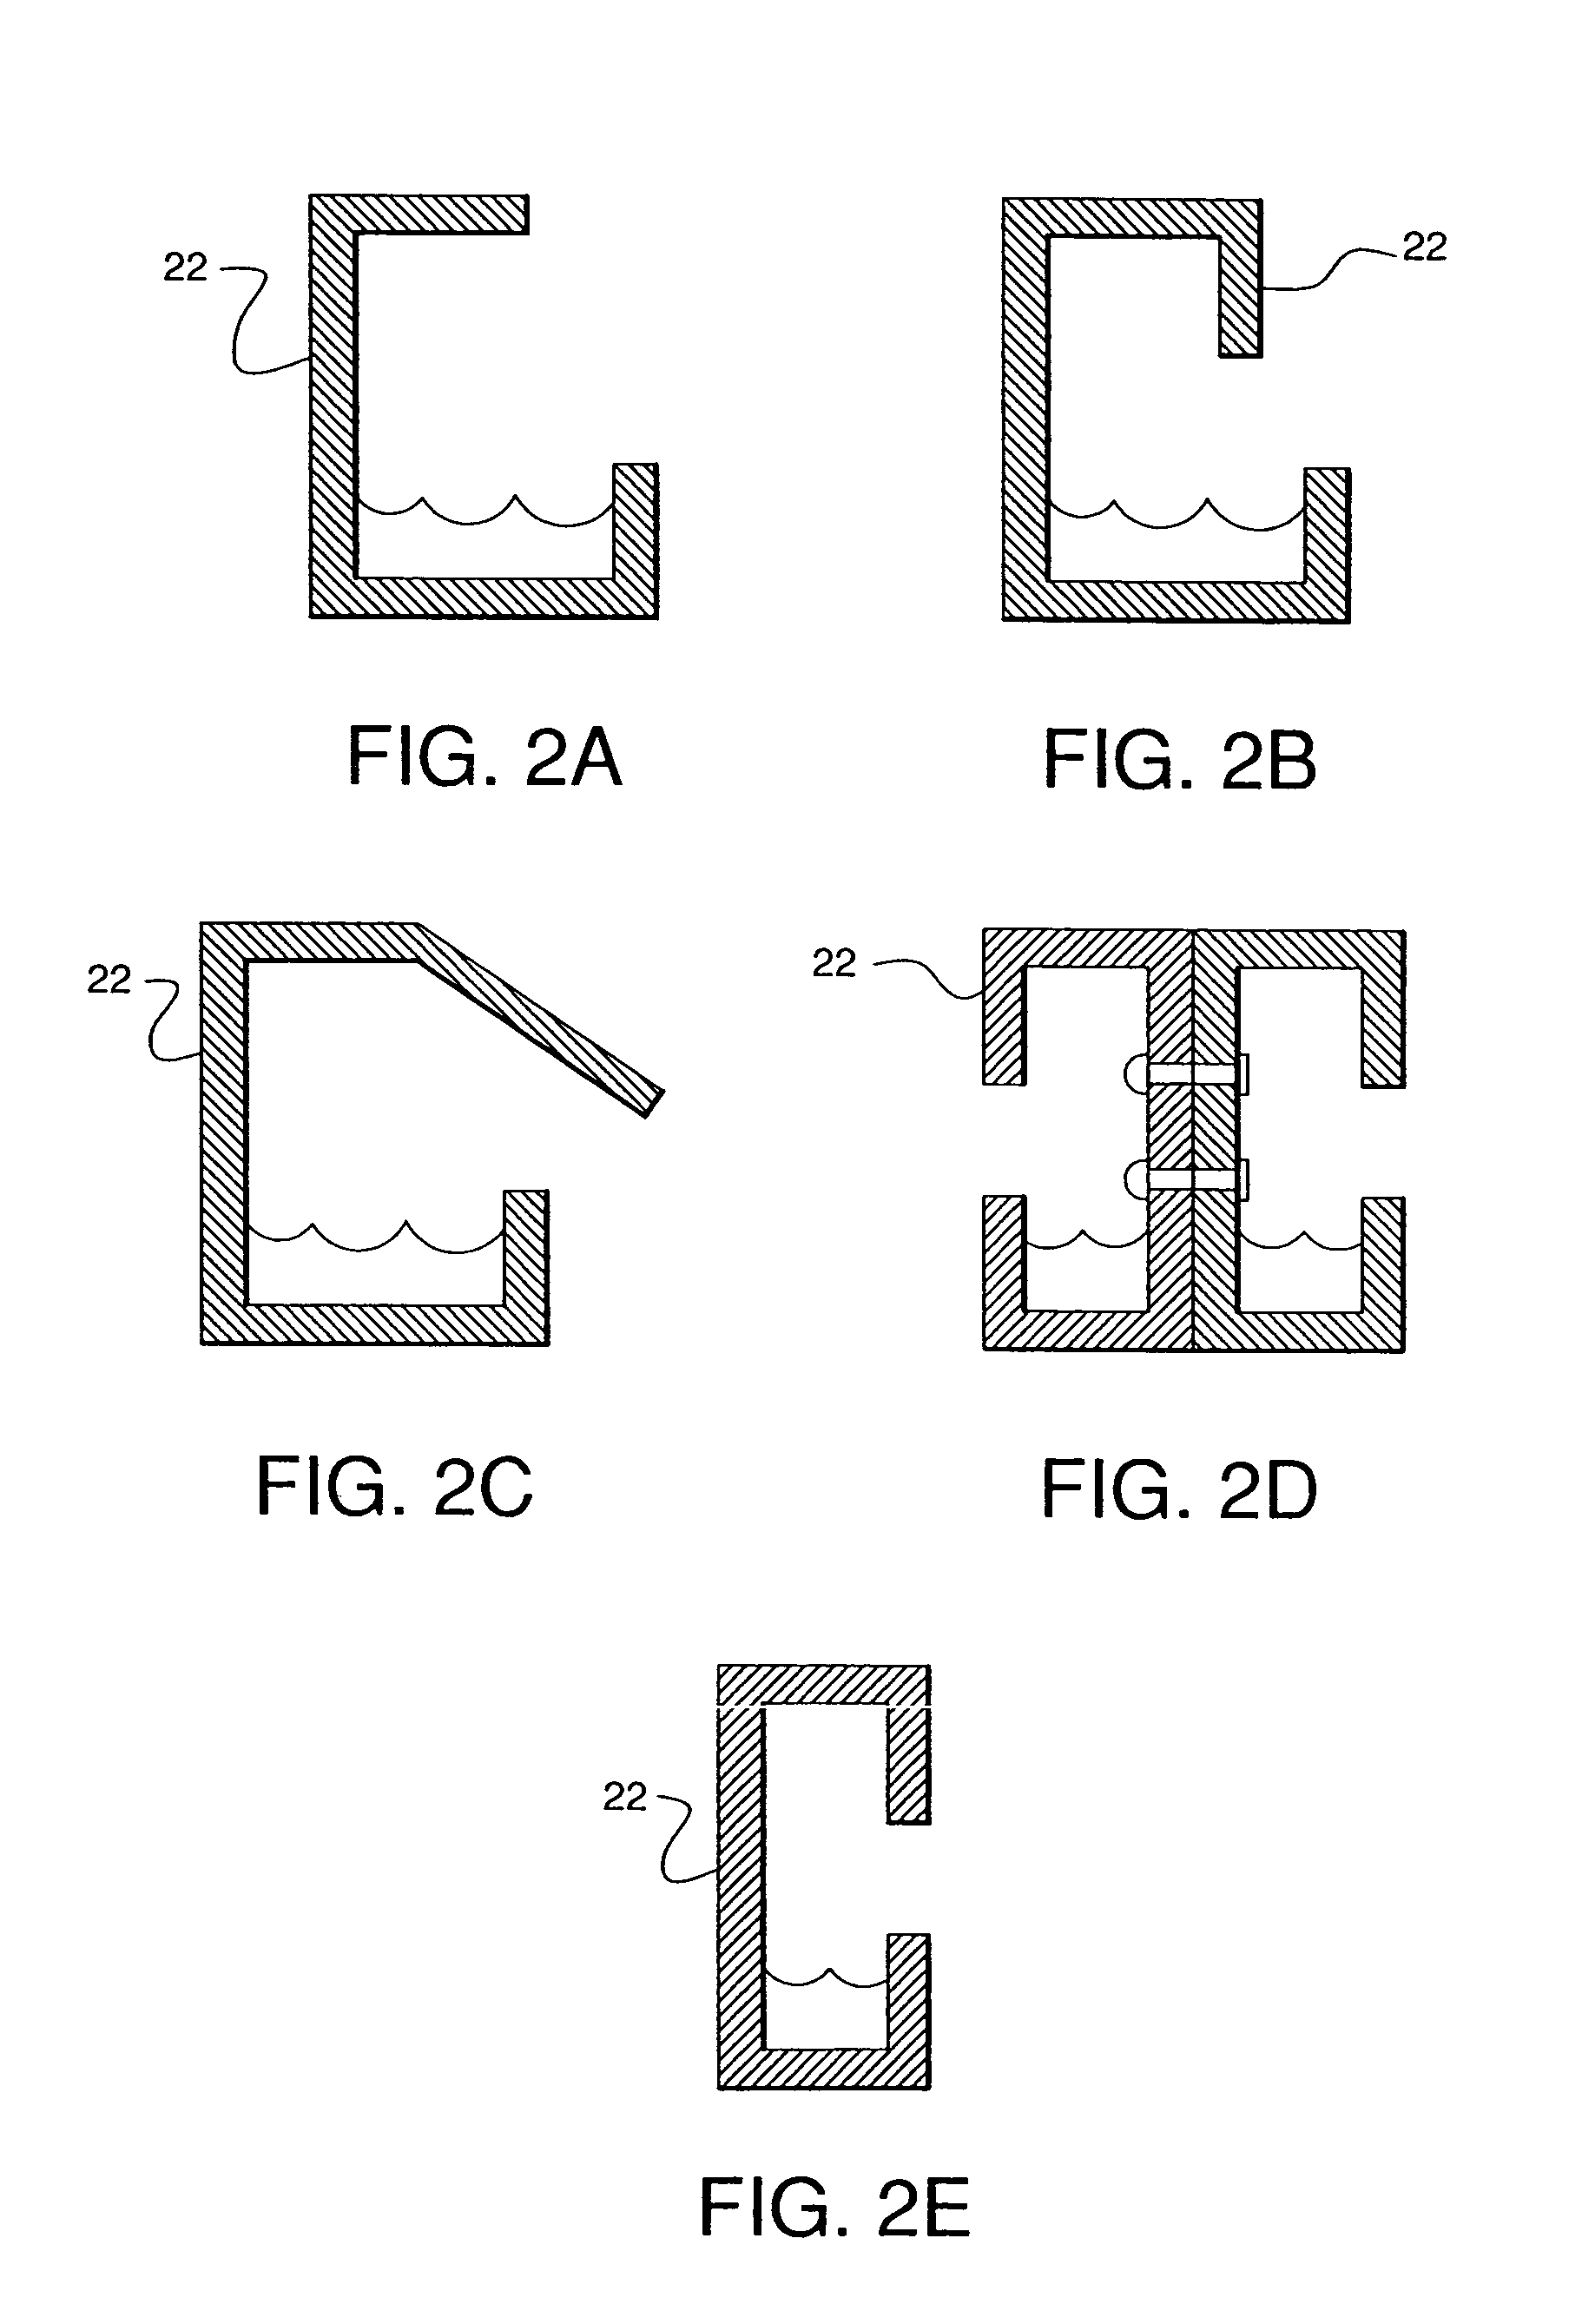 Wall-flow redistributor for packed columns